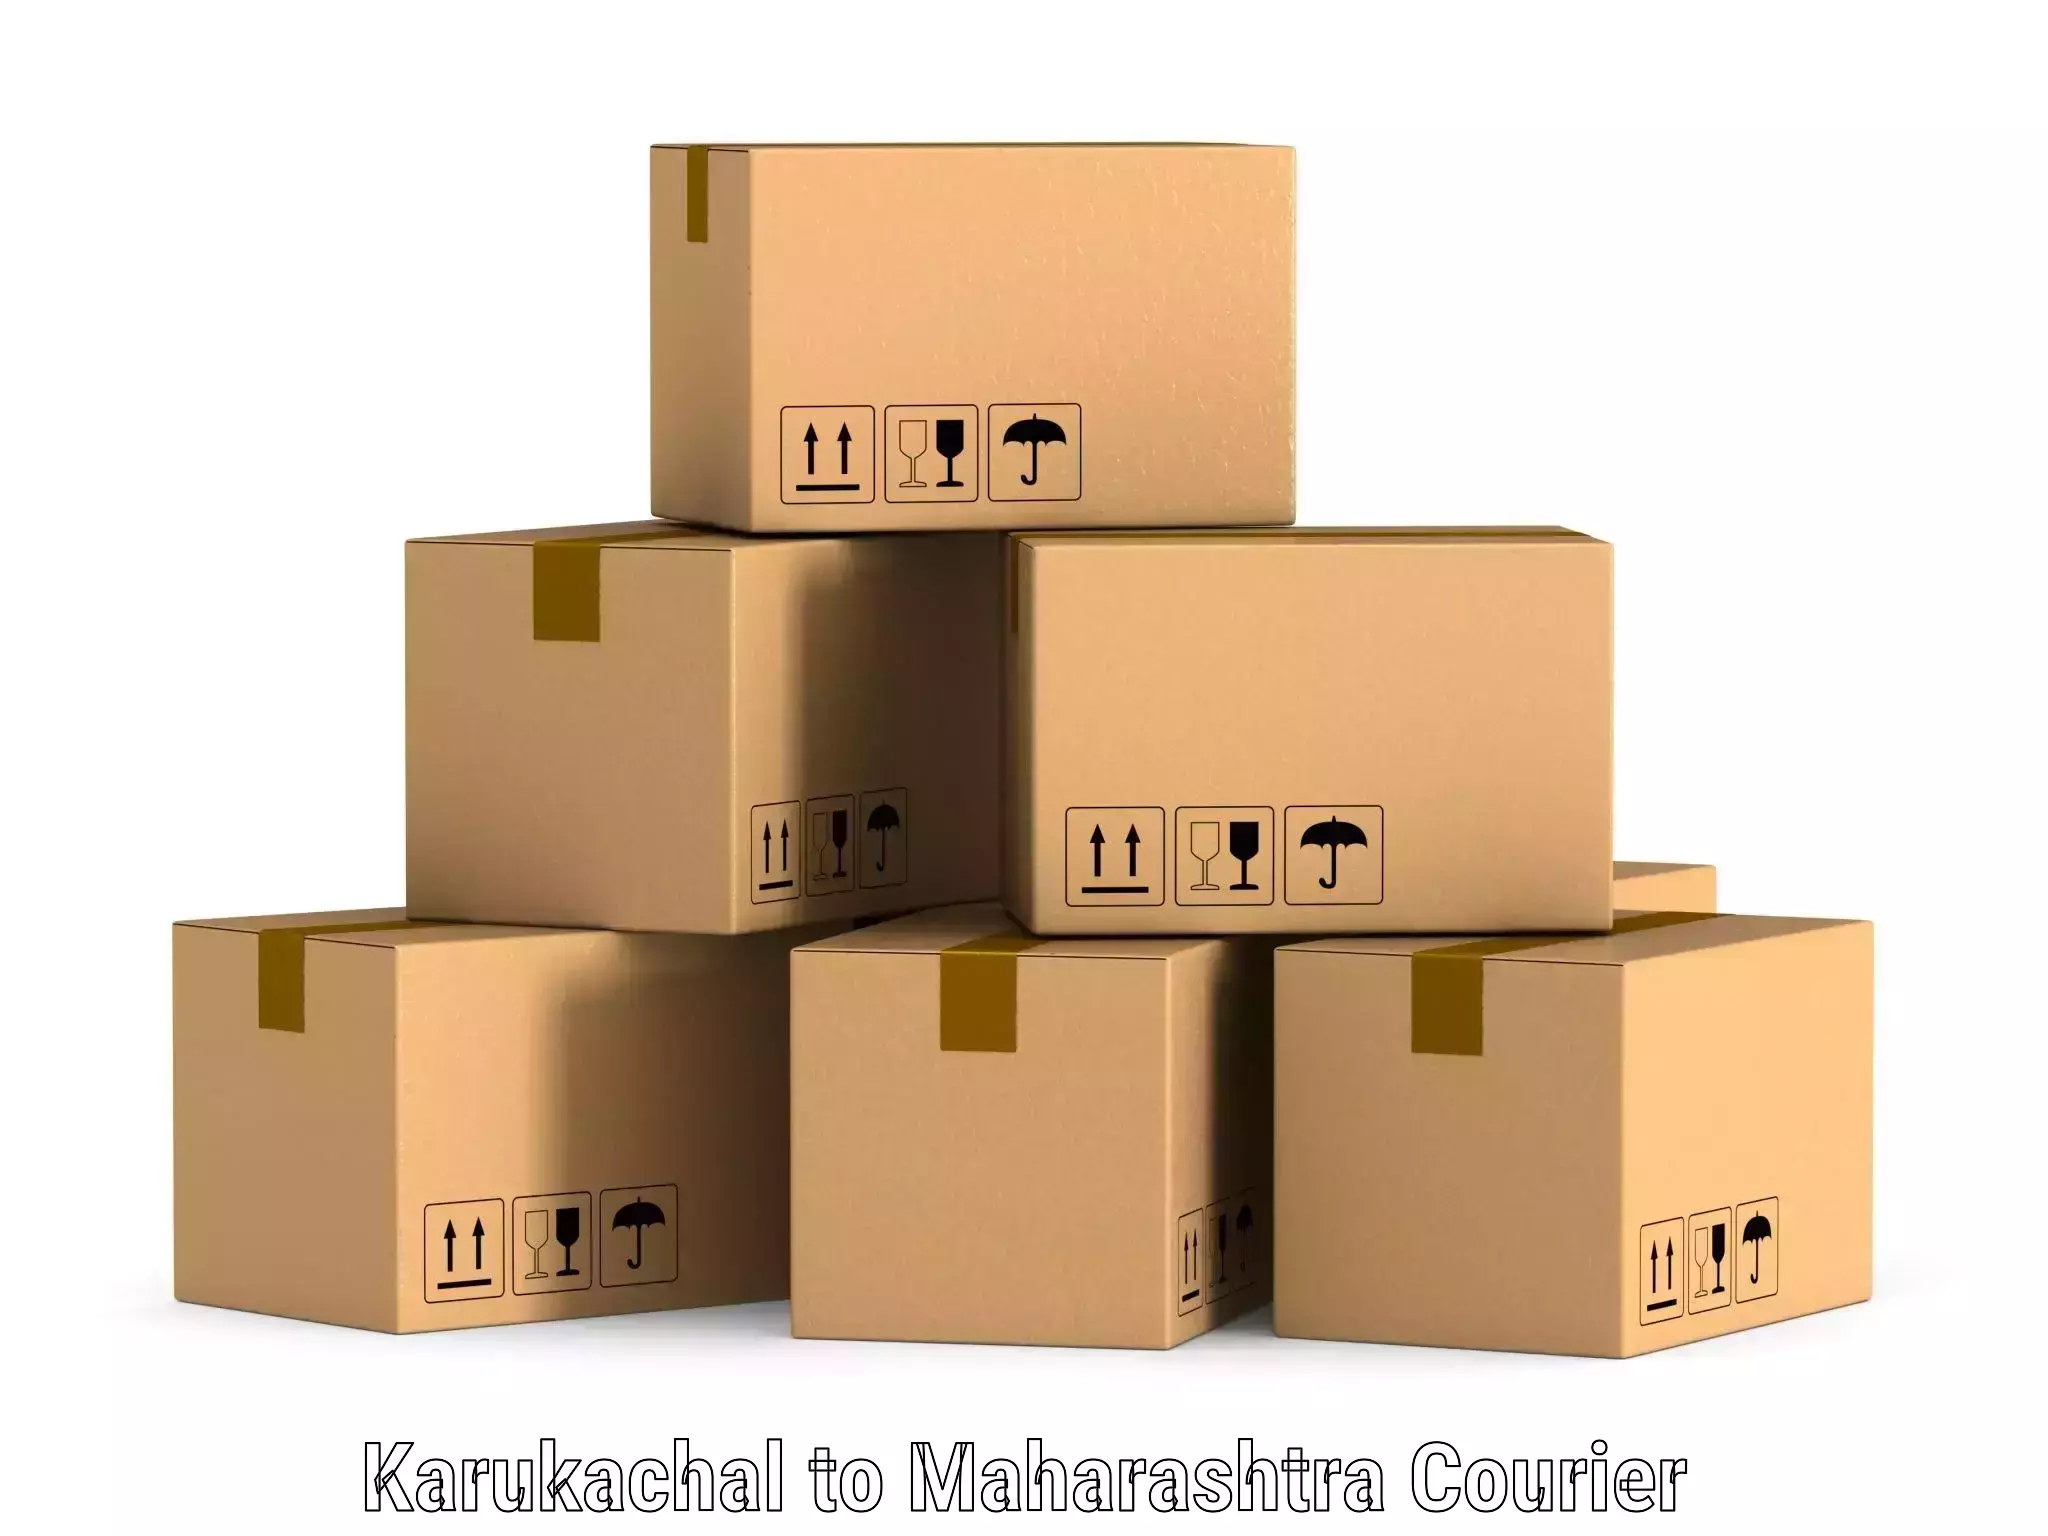 Automated shipping processes Karukachal to Ambegaon